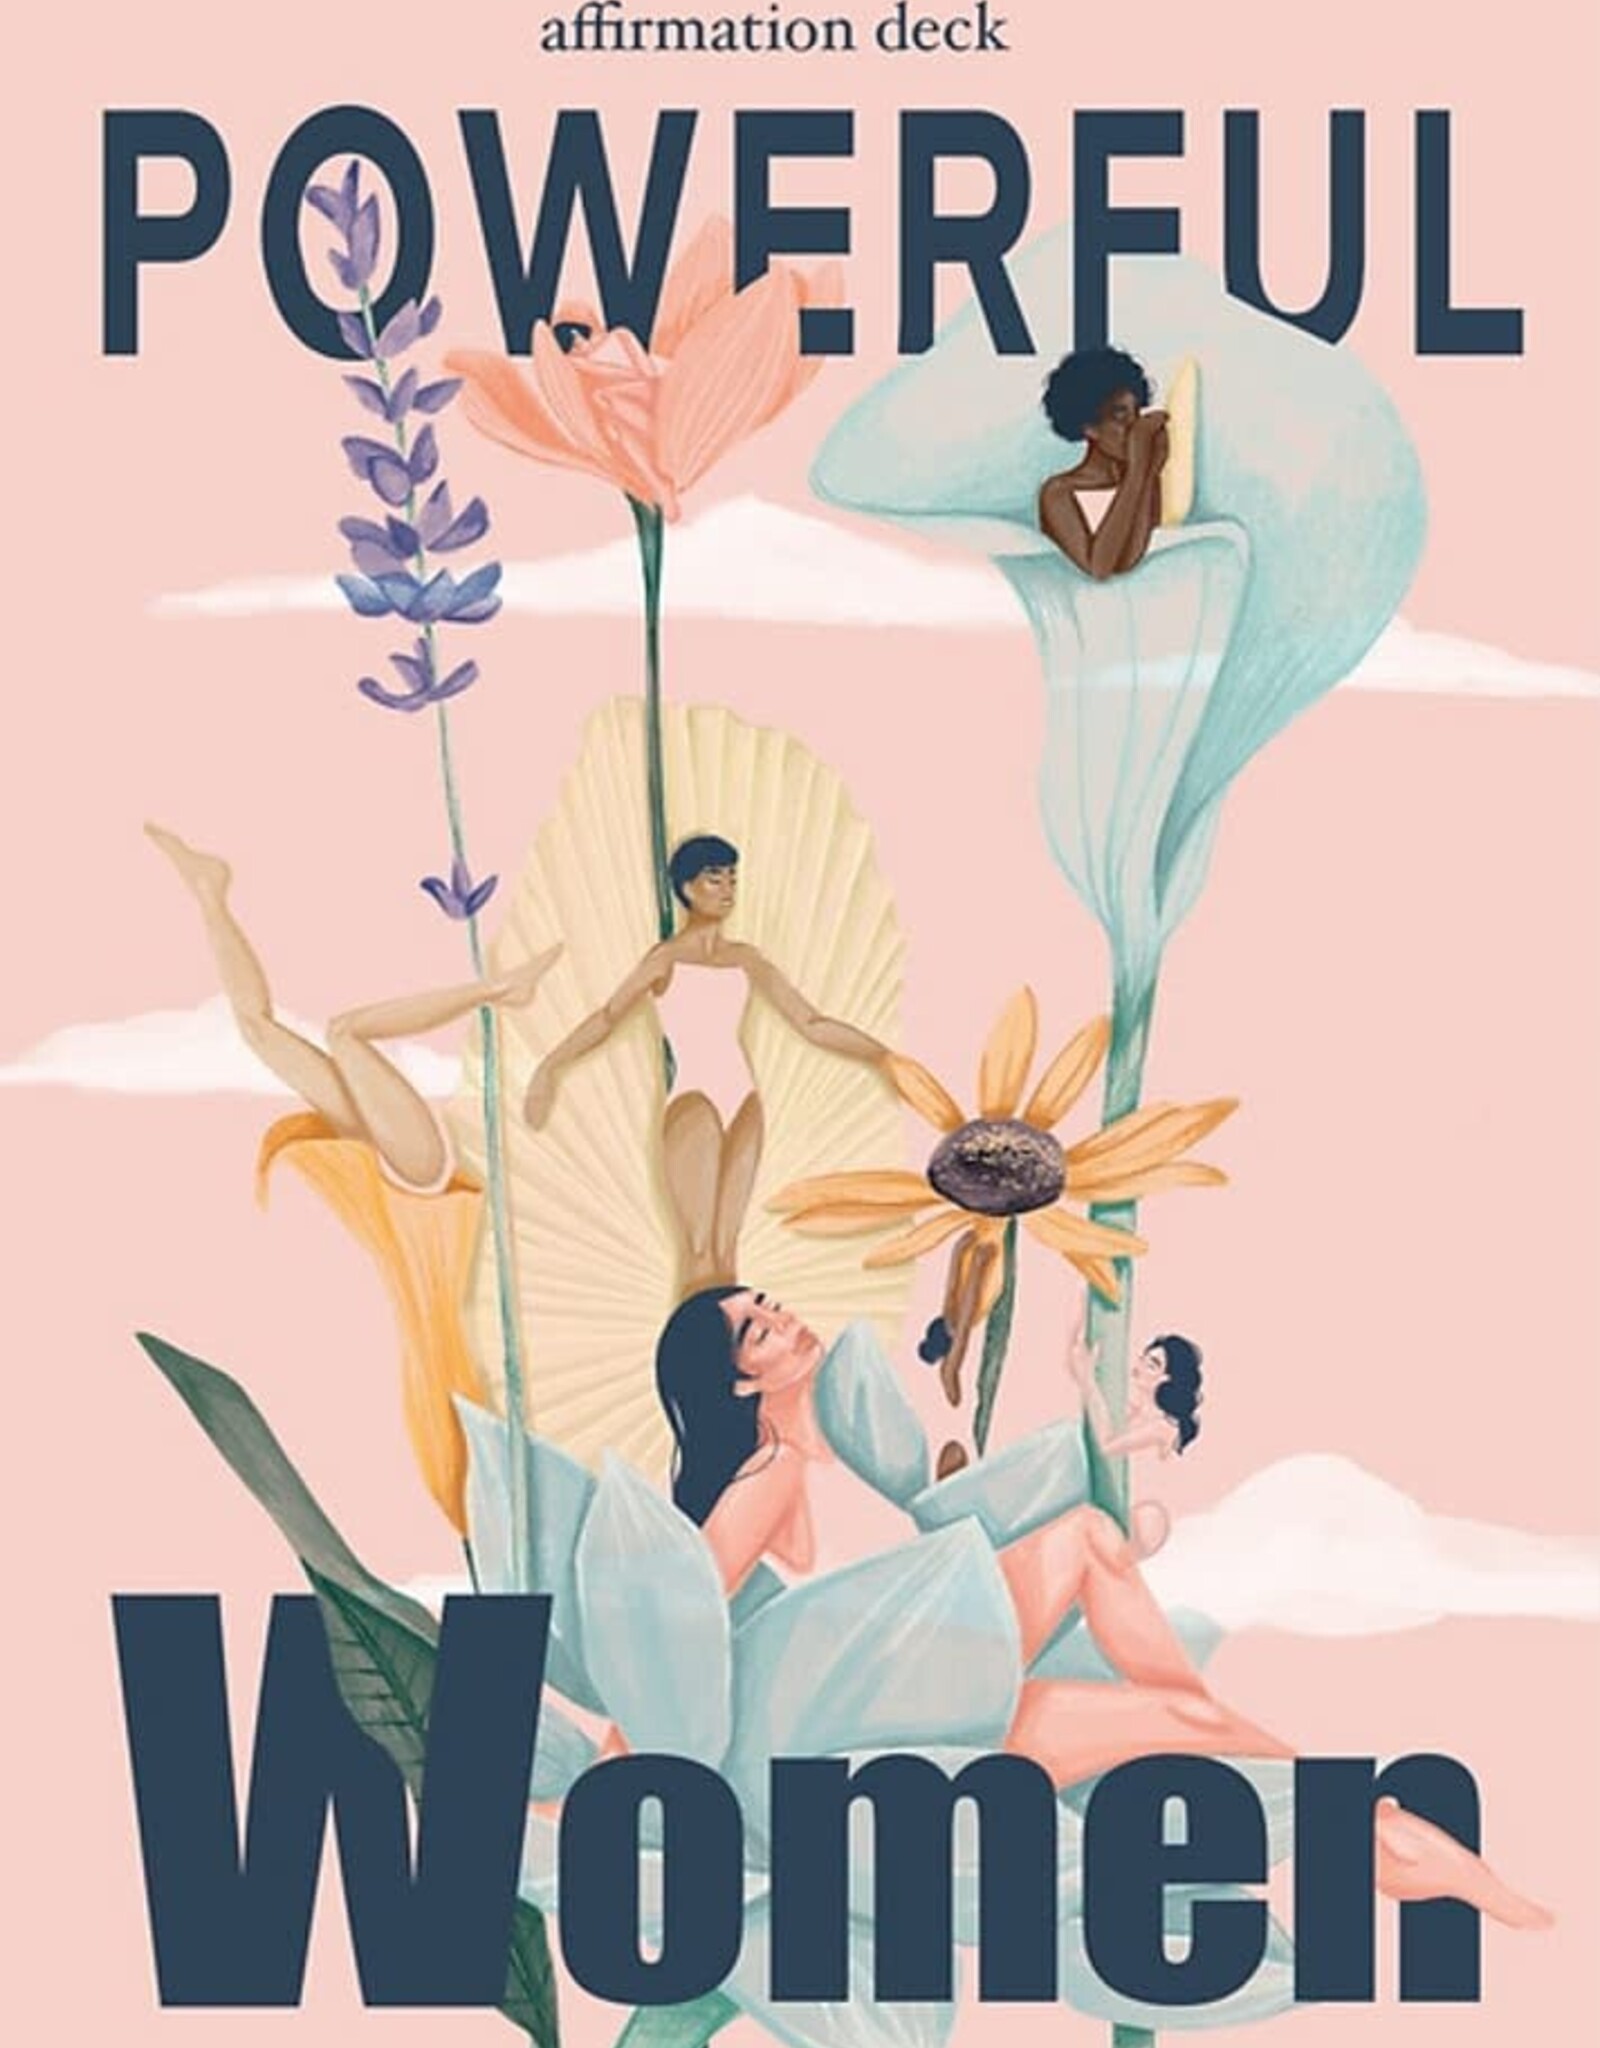 New Mags New Mags - Powerful women affirmation cards